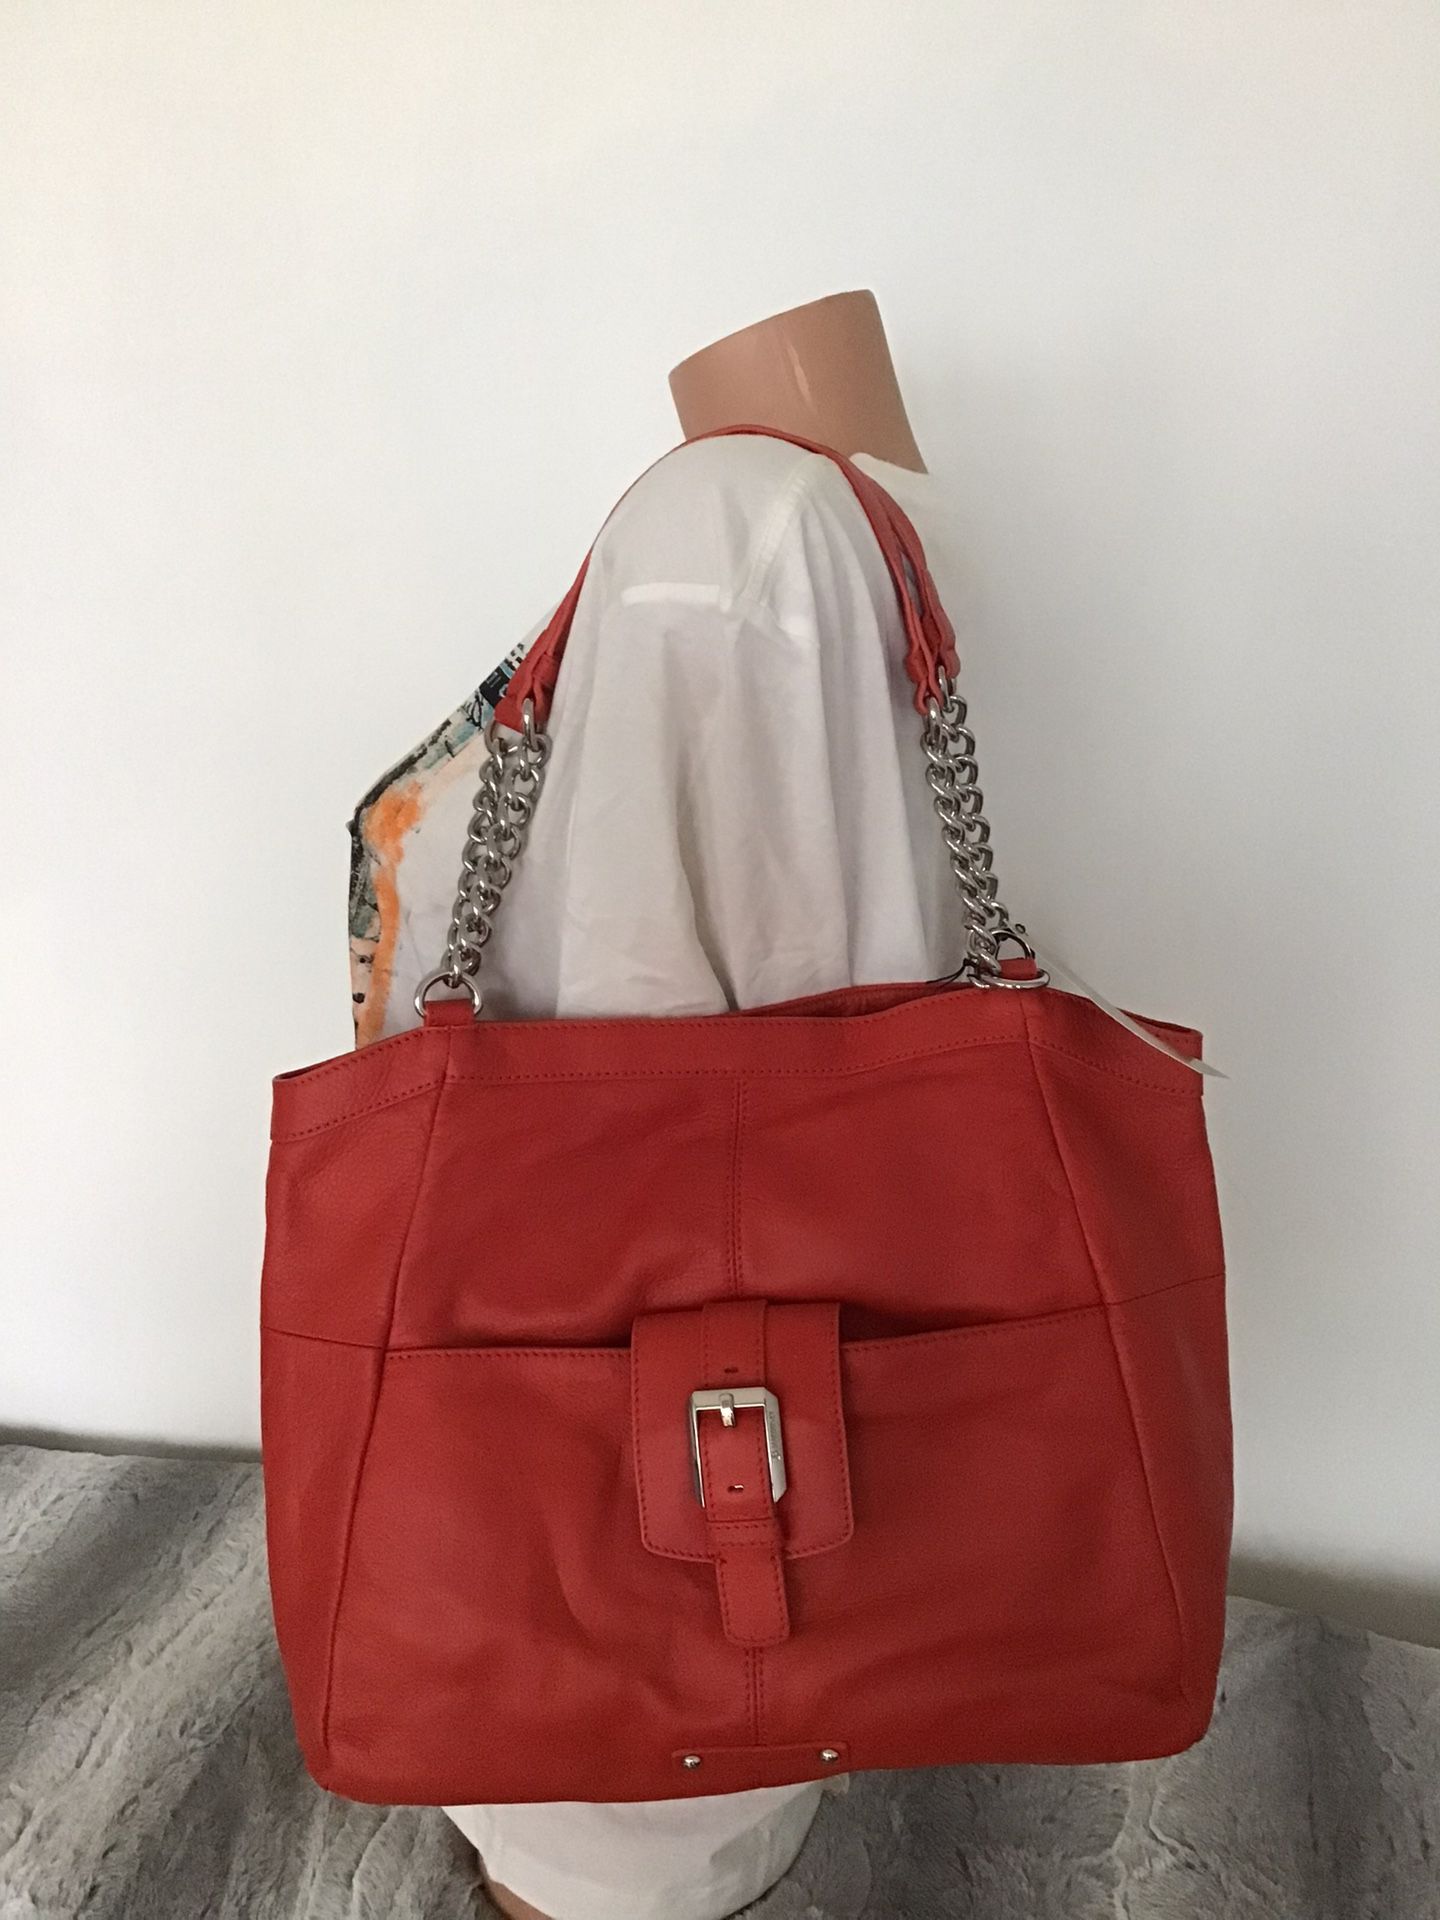 Makovsky Woman Red Leather Bag  Tote Brand New 